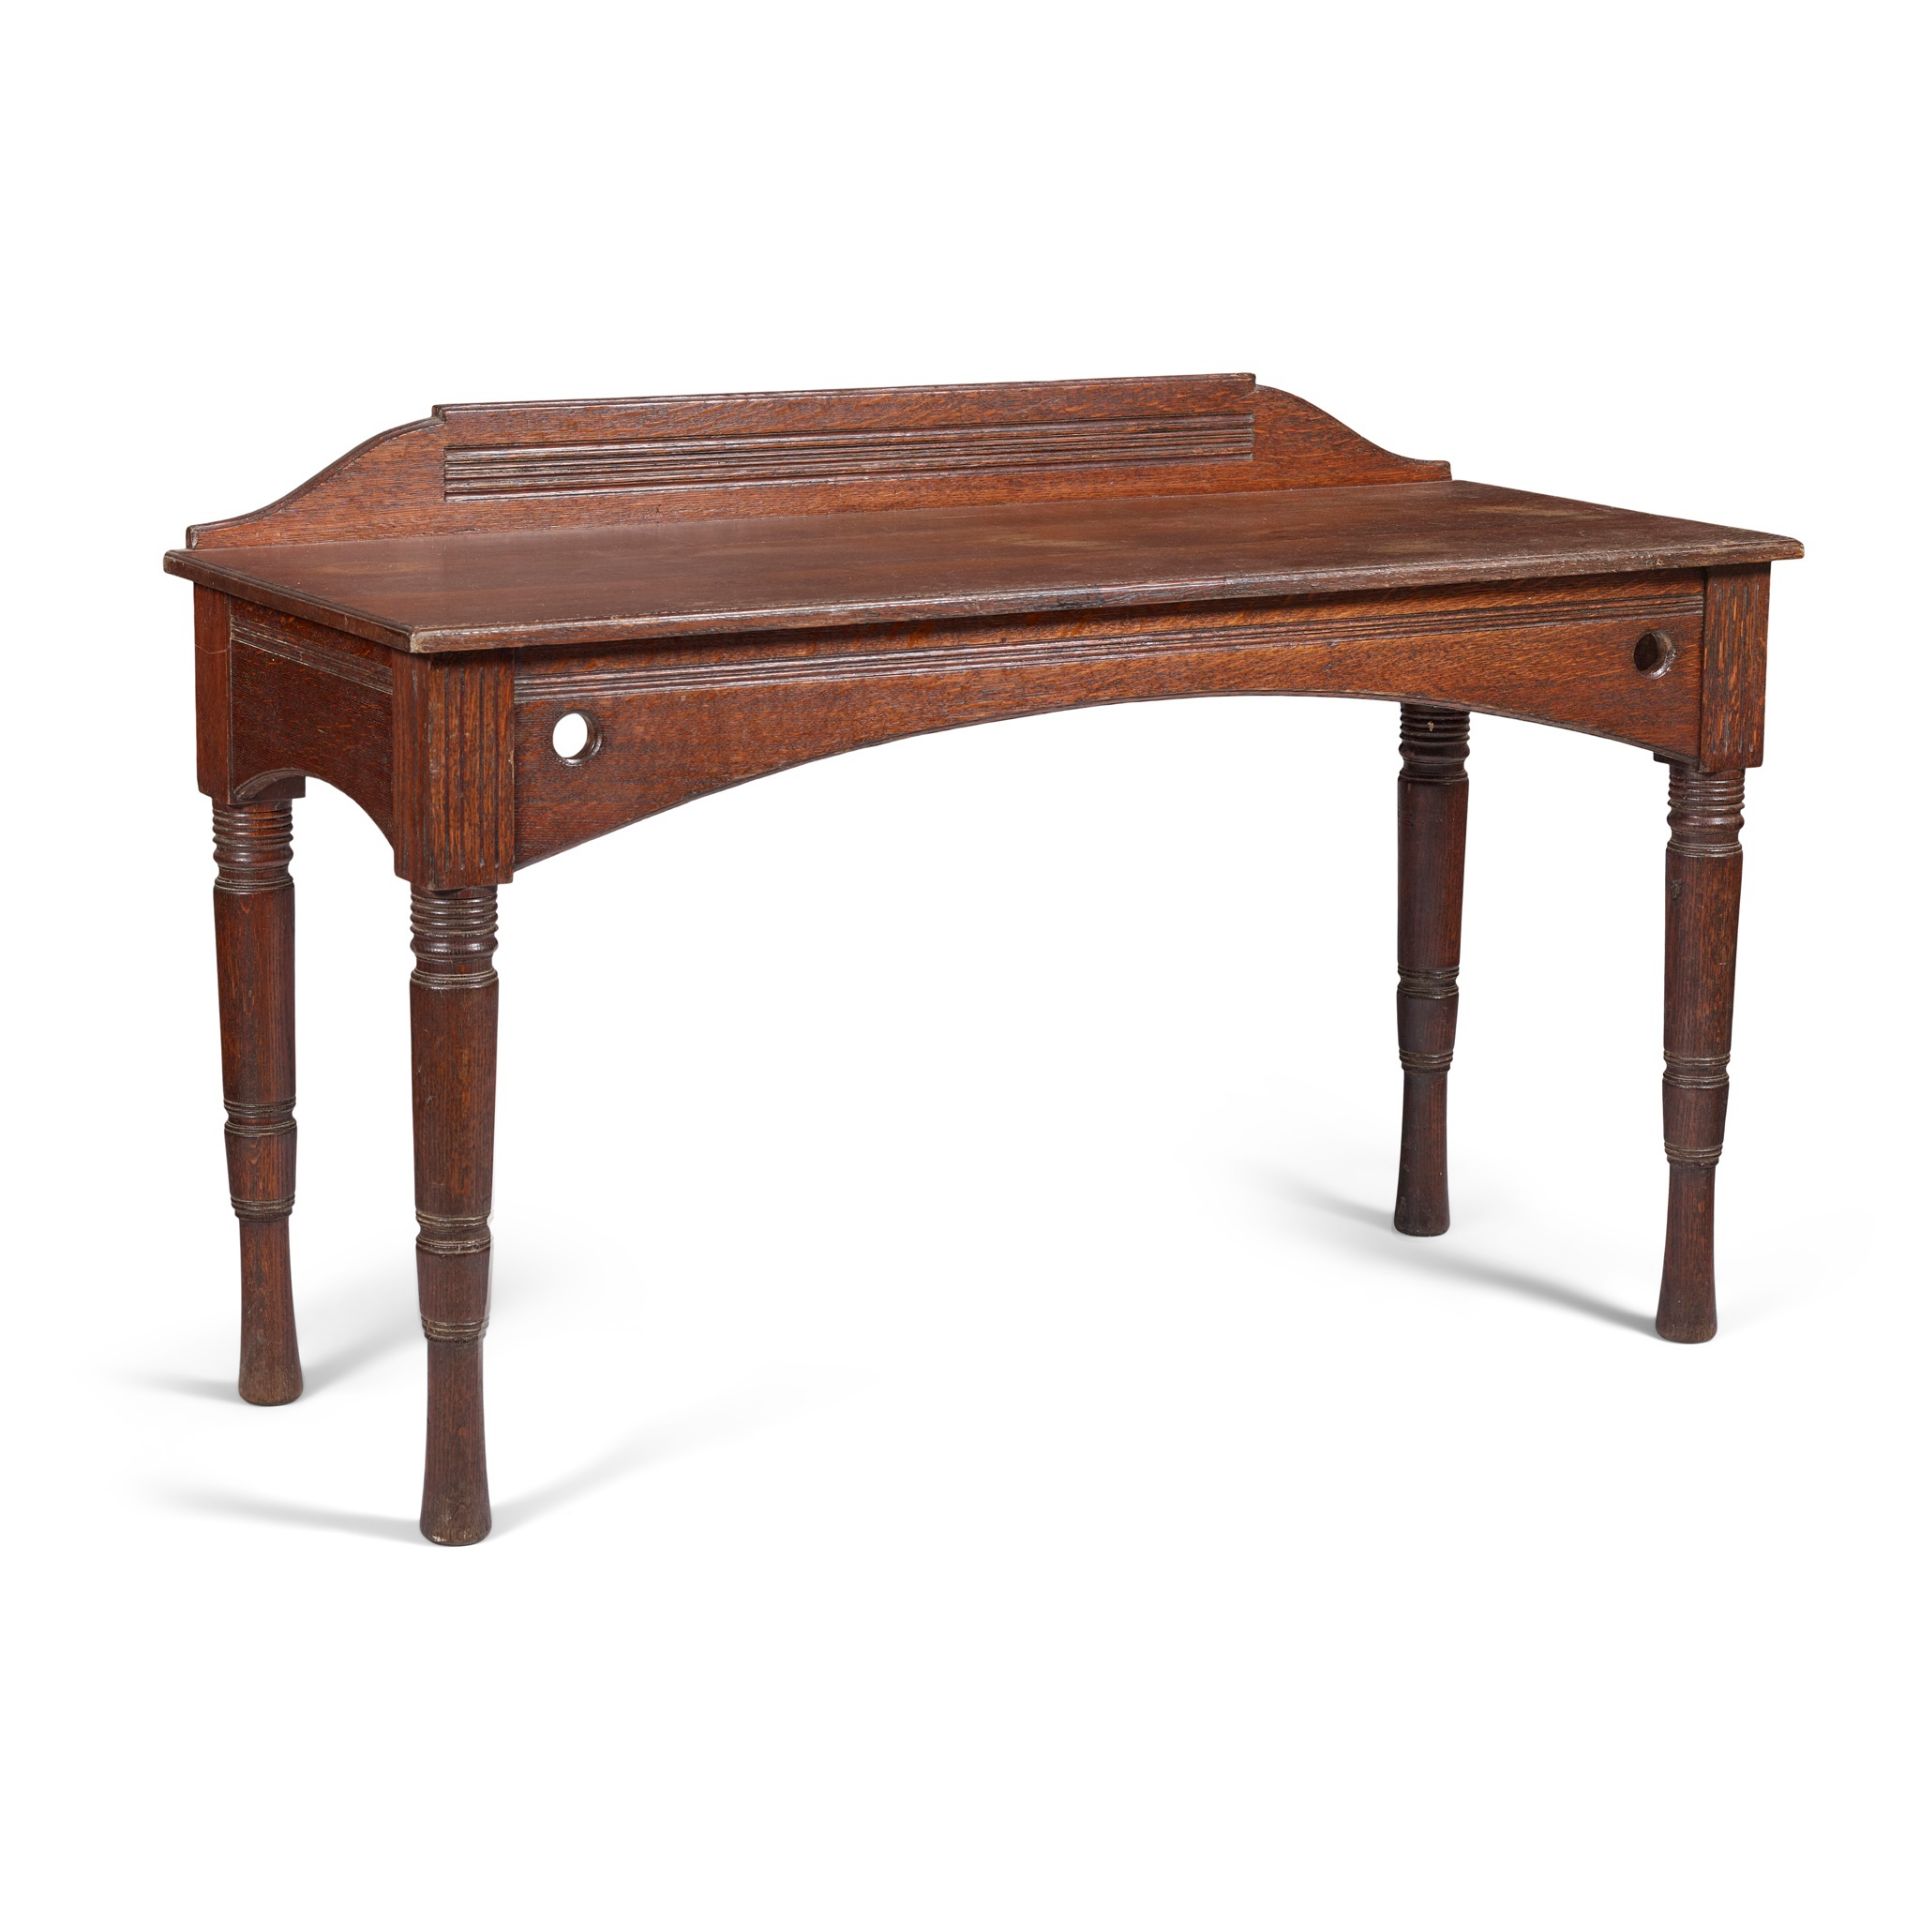 EGYPTIAN REVIVAL ARTS & CRAFTS SERVING TABLE, CIRCA 1880